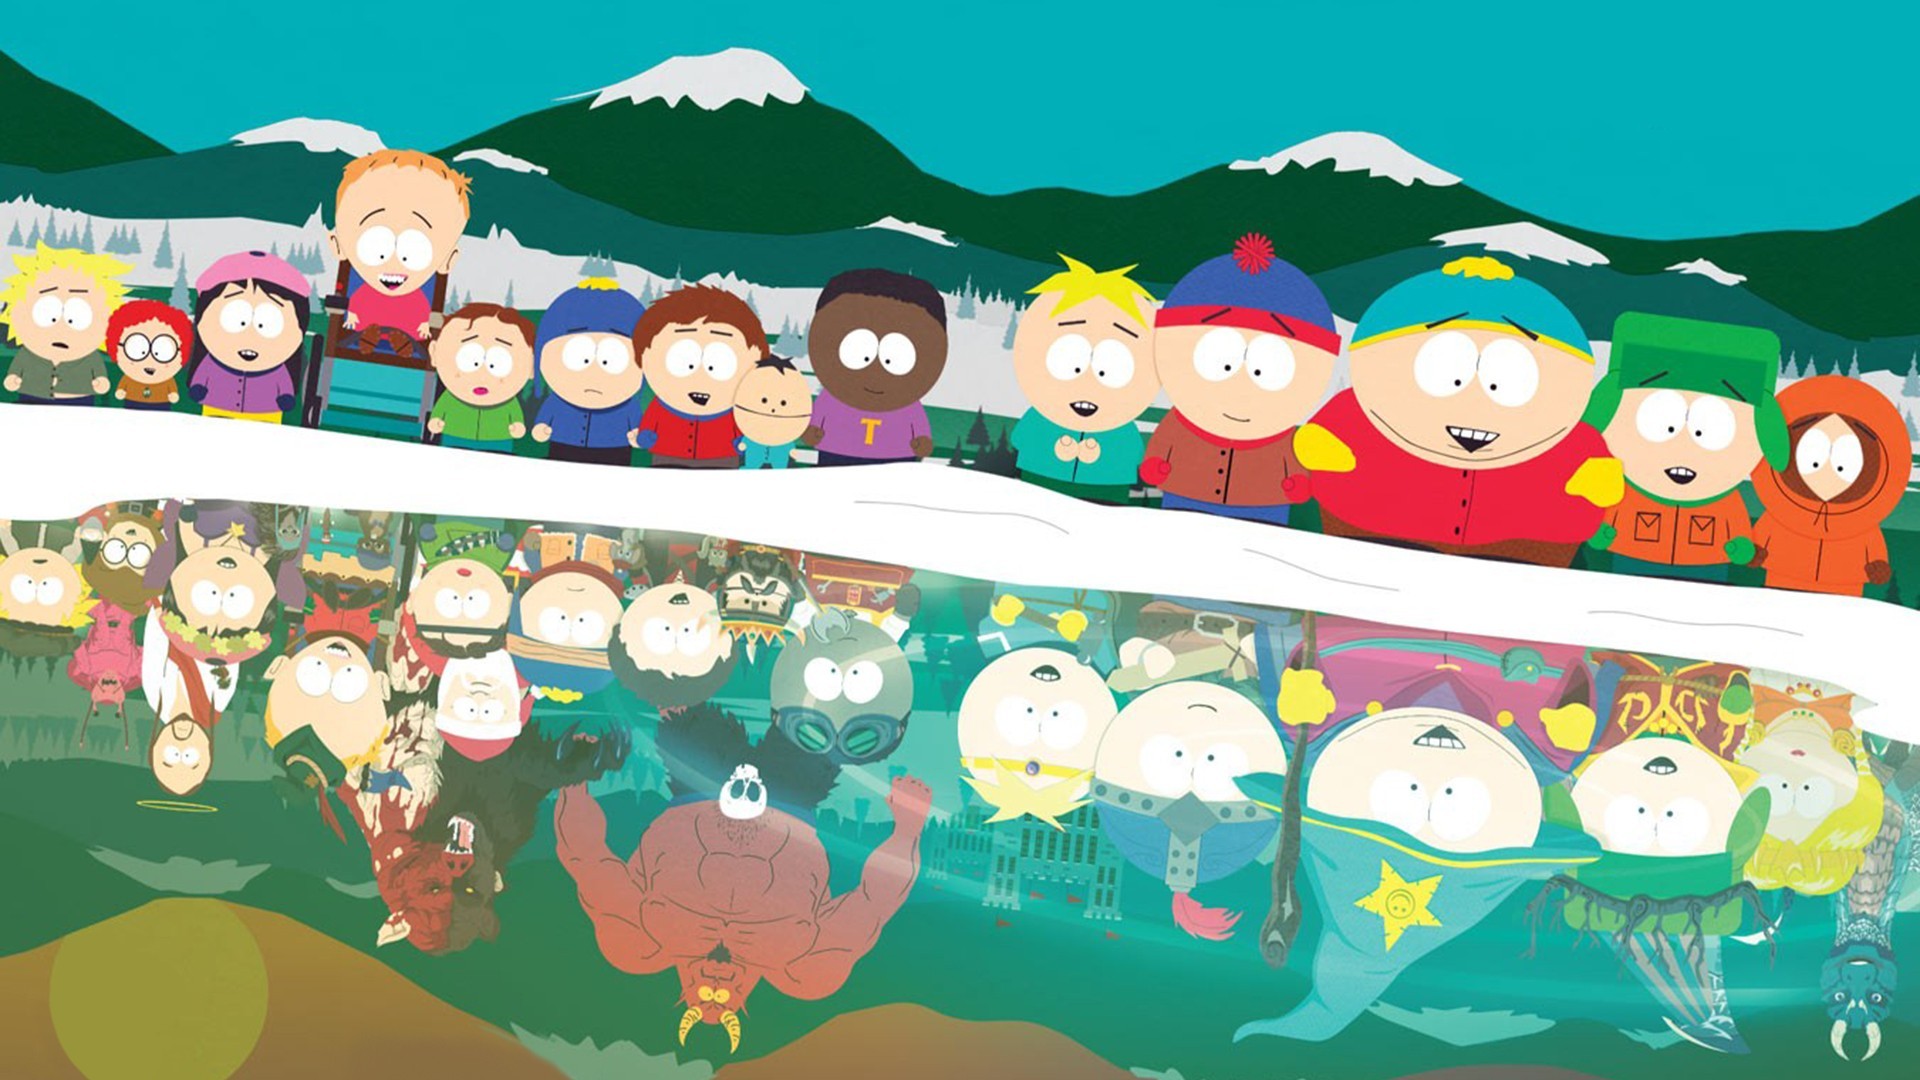 General 1920x1080 South Park South Park: The Stick Of Truth cartoon TV series reflection video games PC gaming video game art